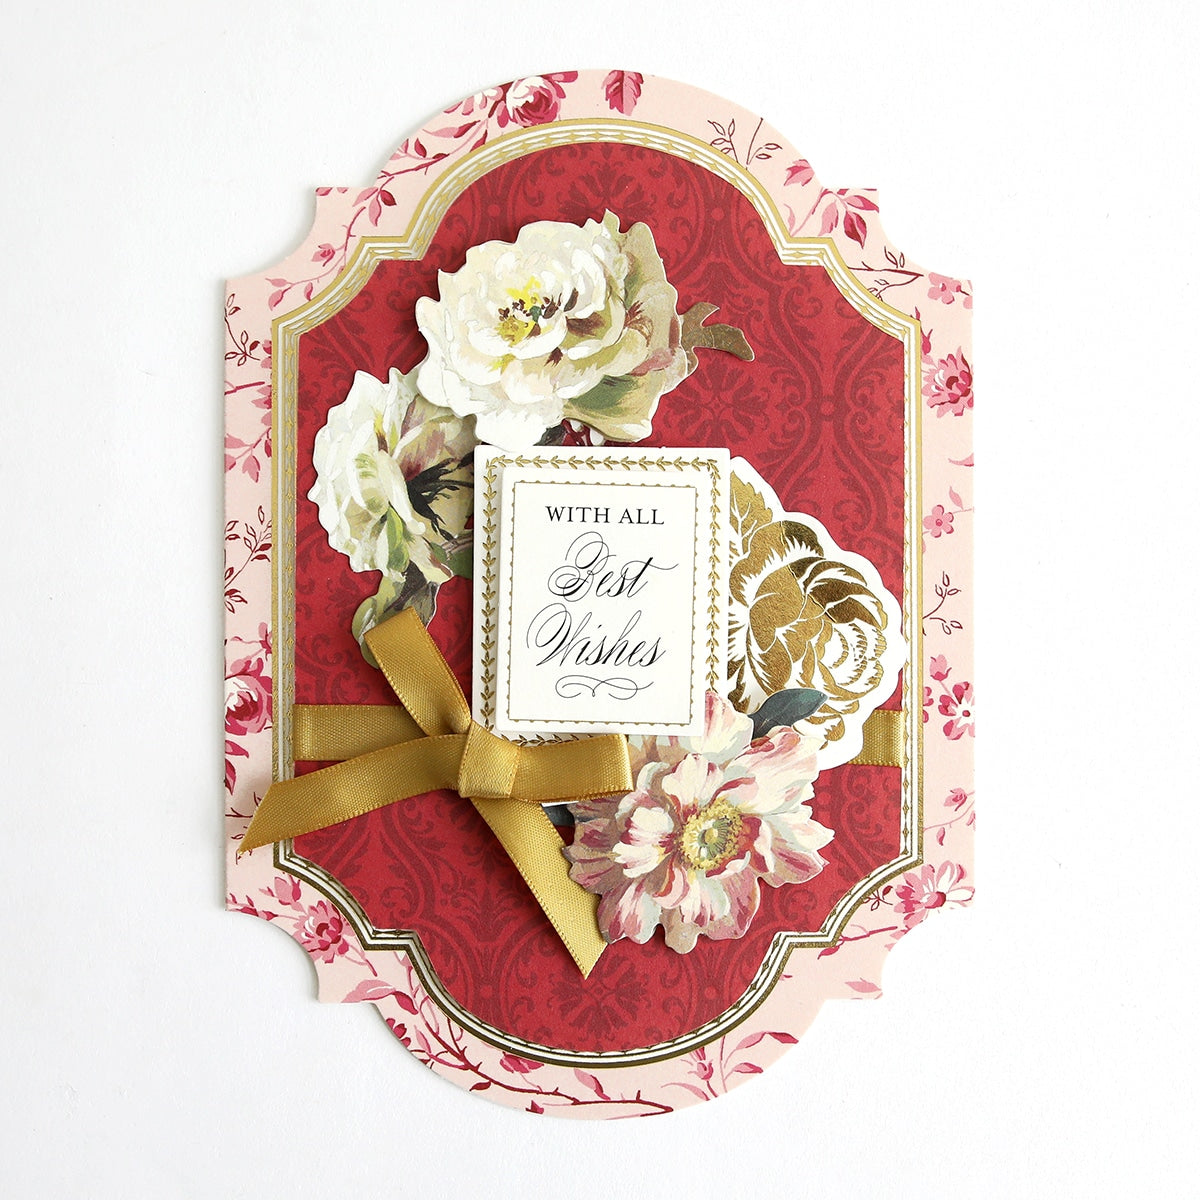 Anna Griffin - Card Making Kit - in Remembrance